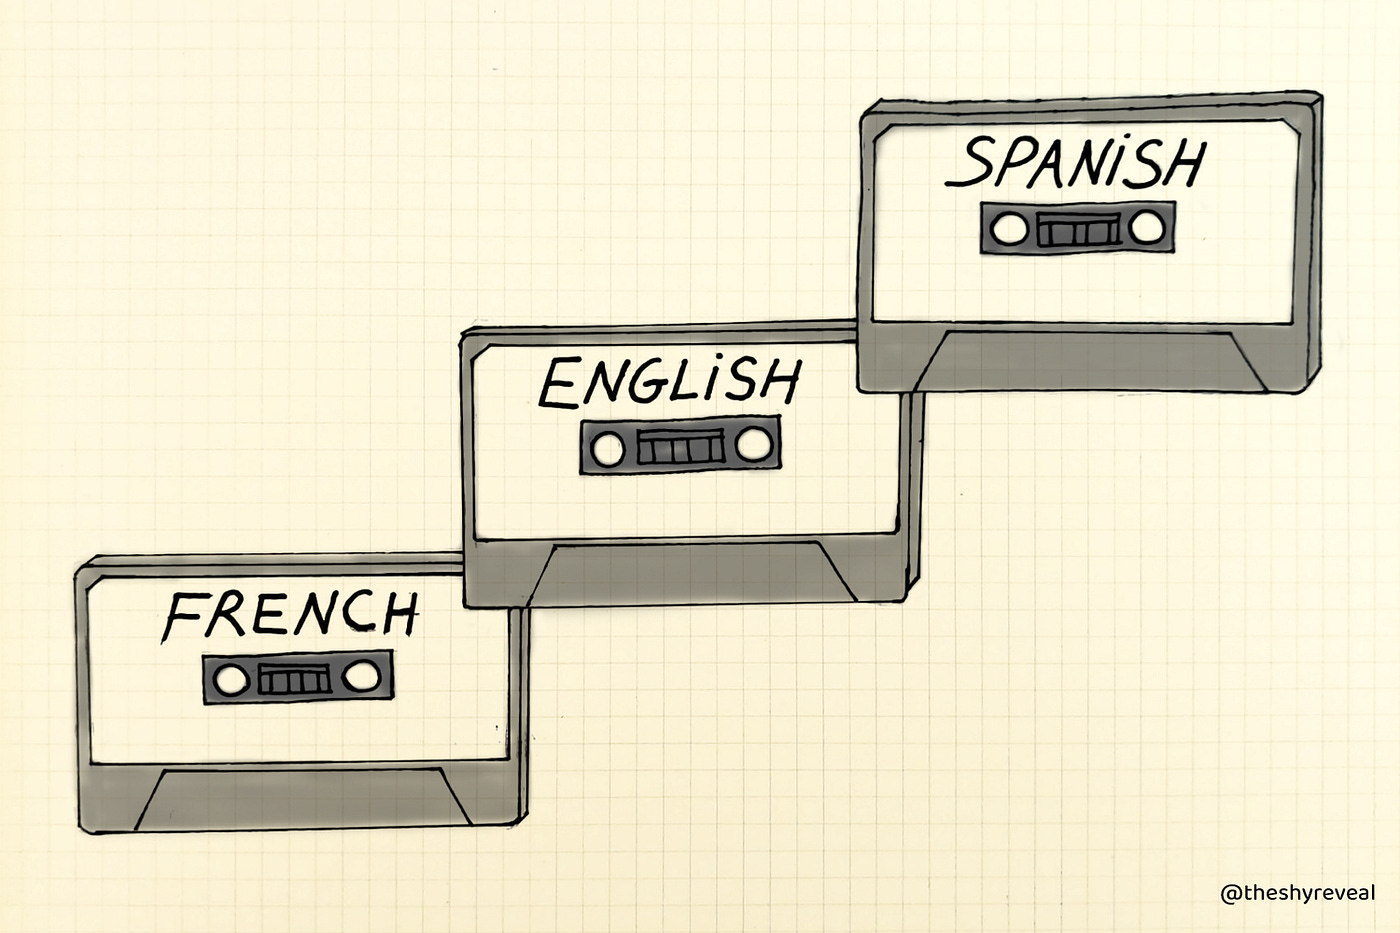 Three cassette tapes that represent the French, English, and Spanish language.